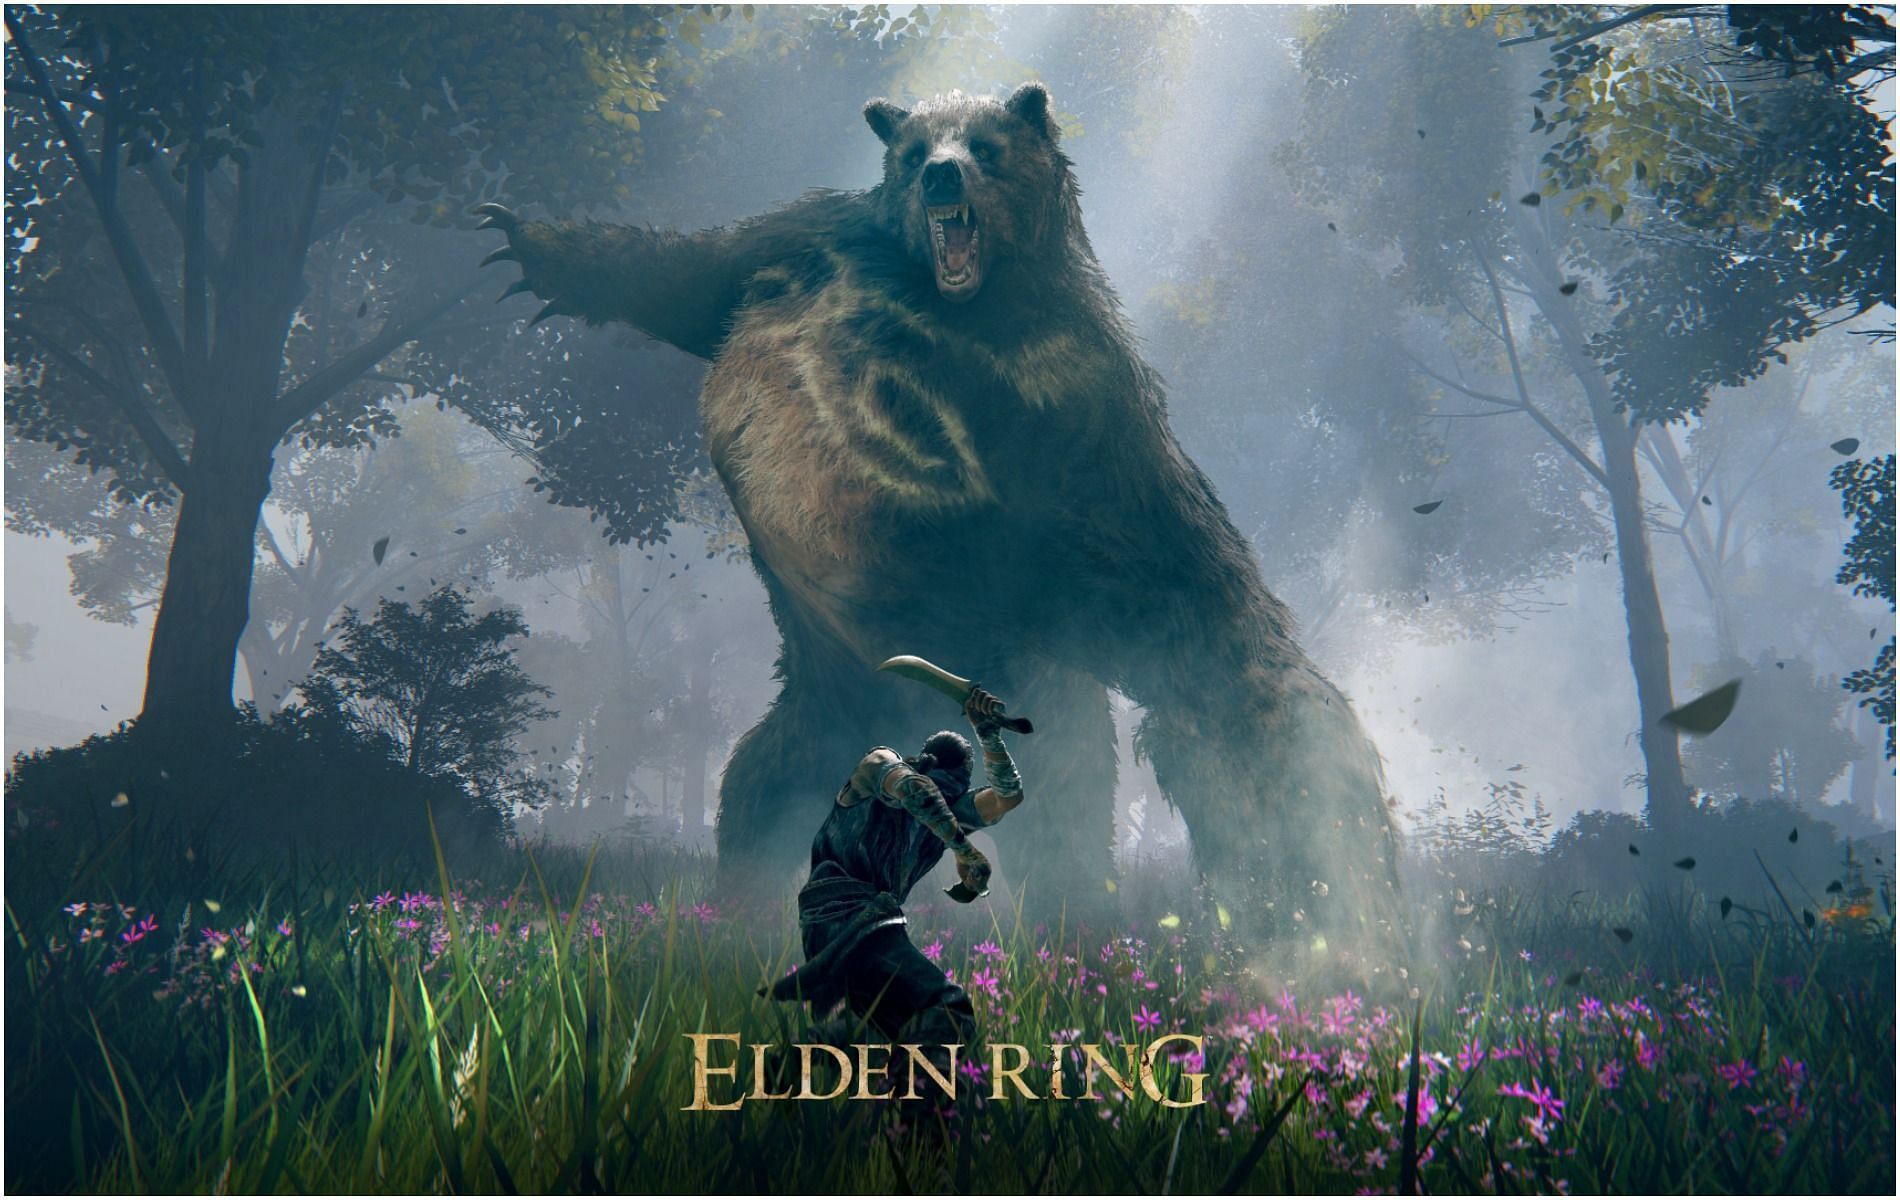 Elden Ring will require 12 GB of RAM to run on PC (Image via FromSoftware)